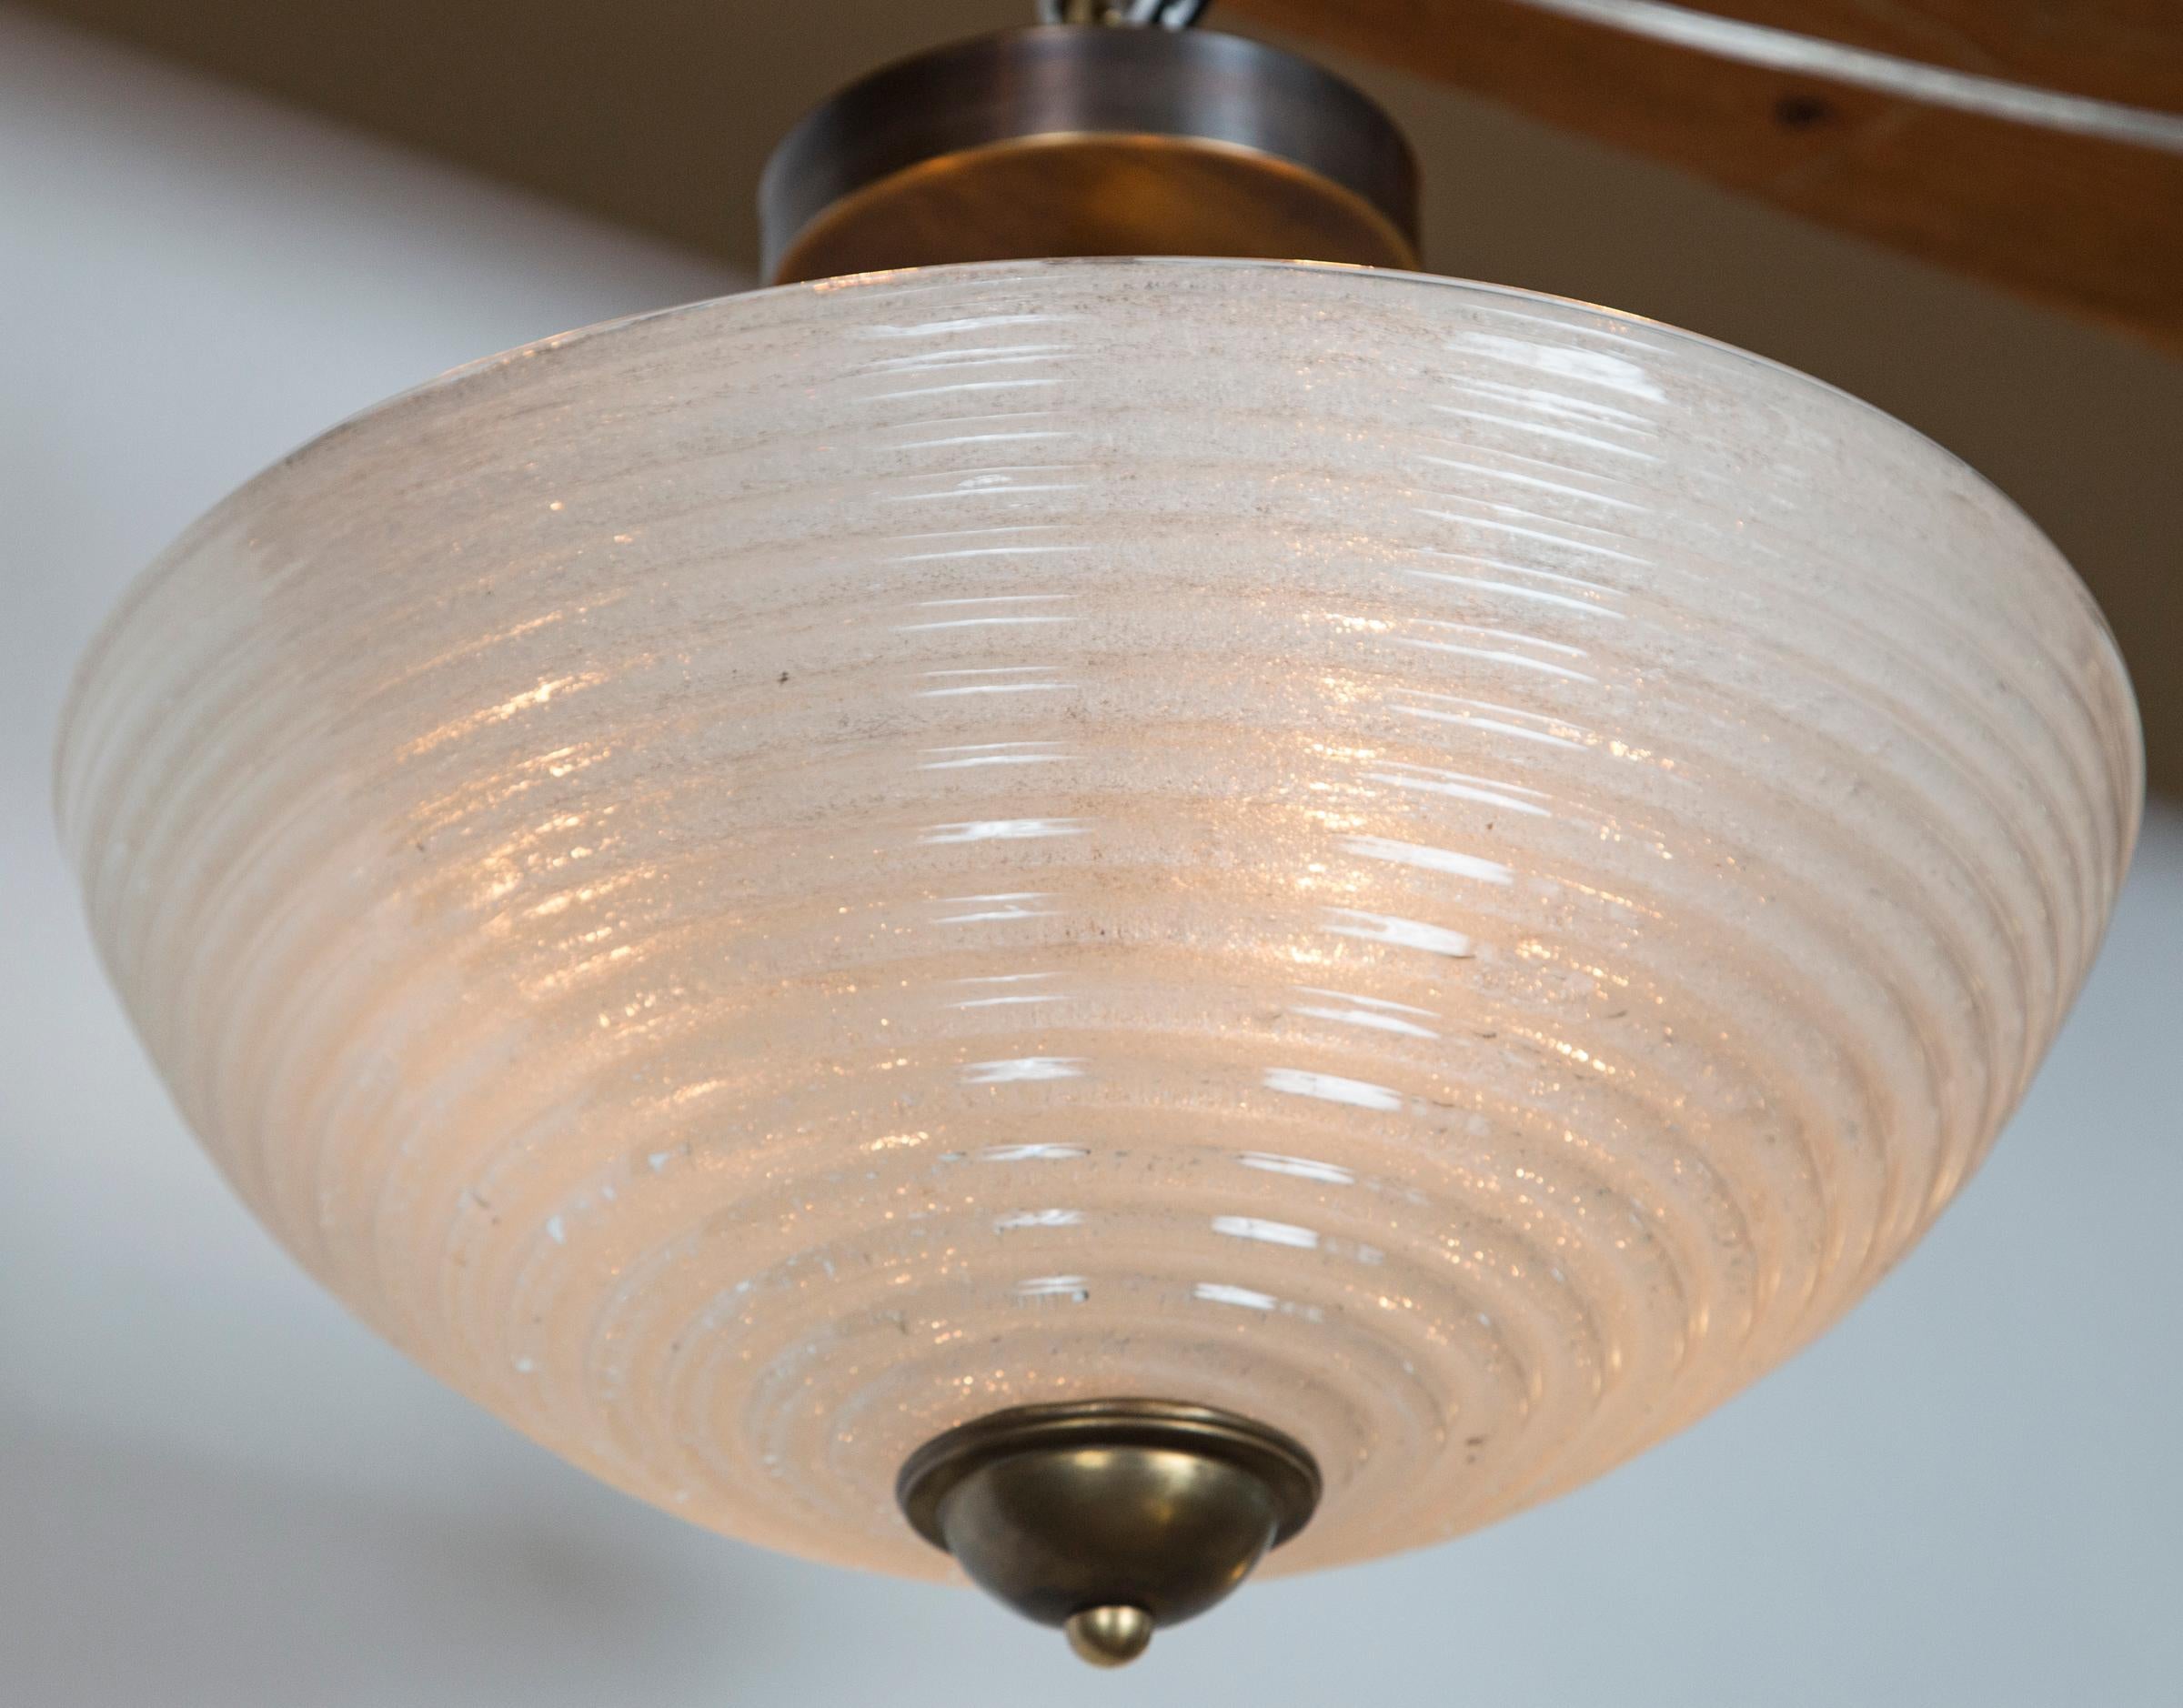 A set of four vintage ribbed dome-shaped ceiling fixtures blown in the pulegoso technique (glass formed with tiny bubbles)which creates an incredible illumination quality, blown in an opaque white color.
sold as electrified to code with custom made